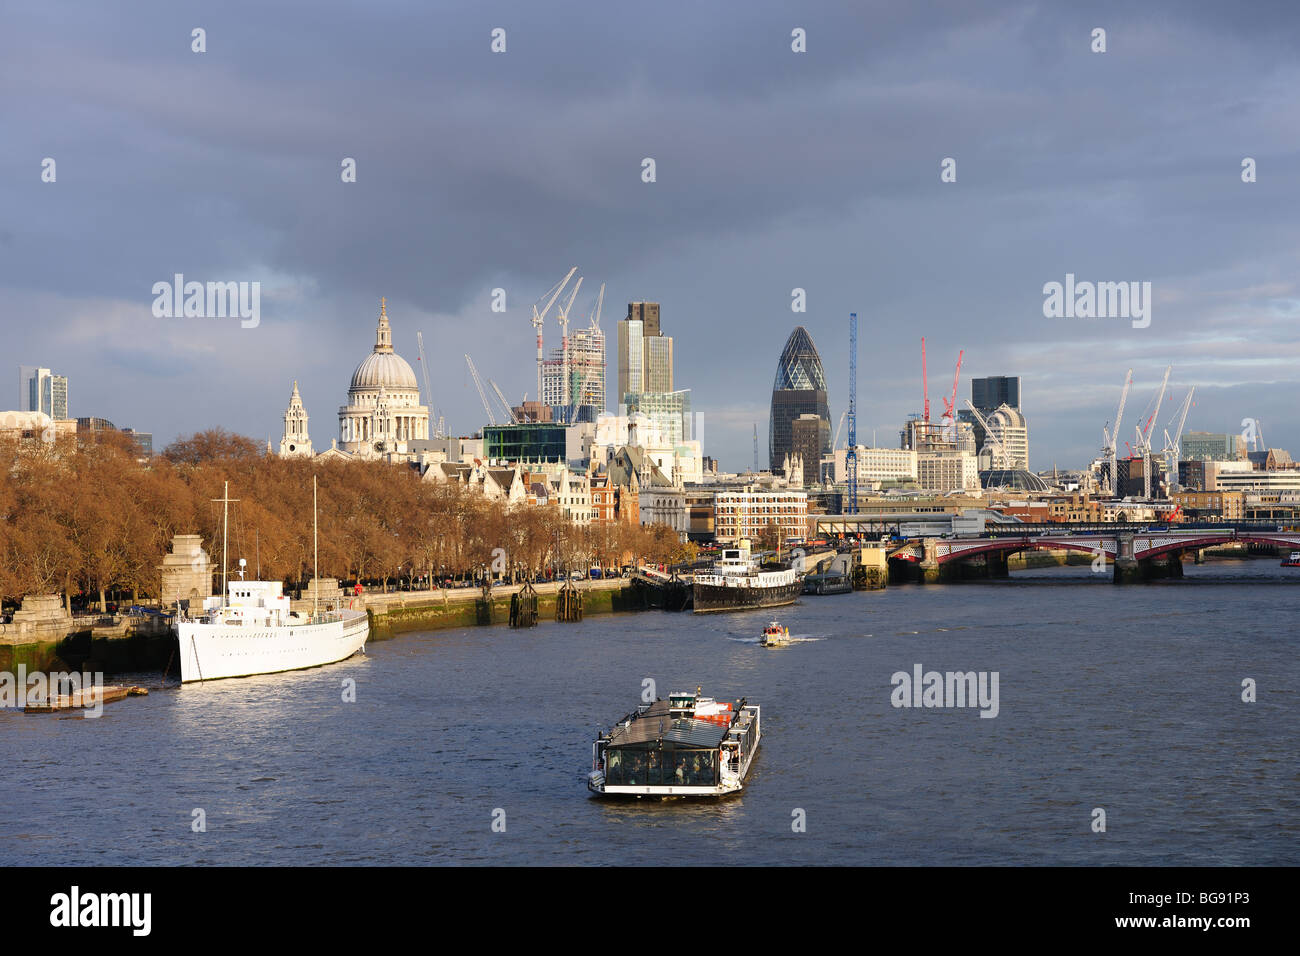 View over the River Thames, London, England, UK to St Paul's Cathedral, and the City, in warm winter light Stock Photo